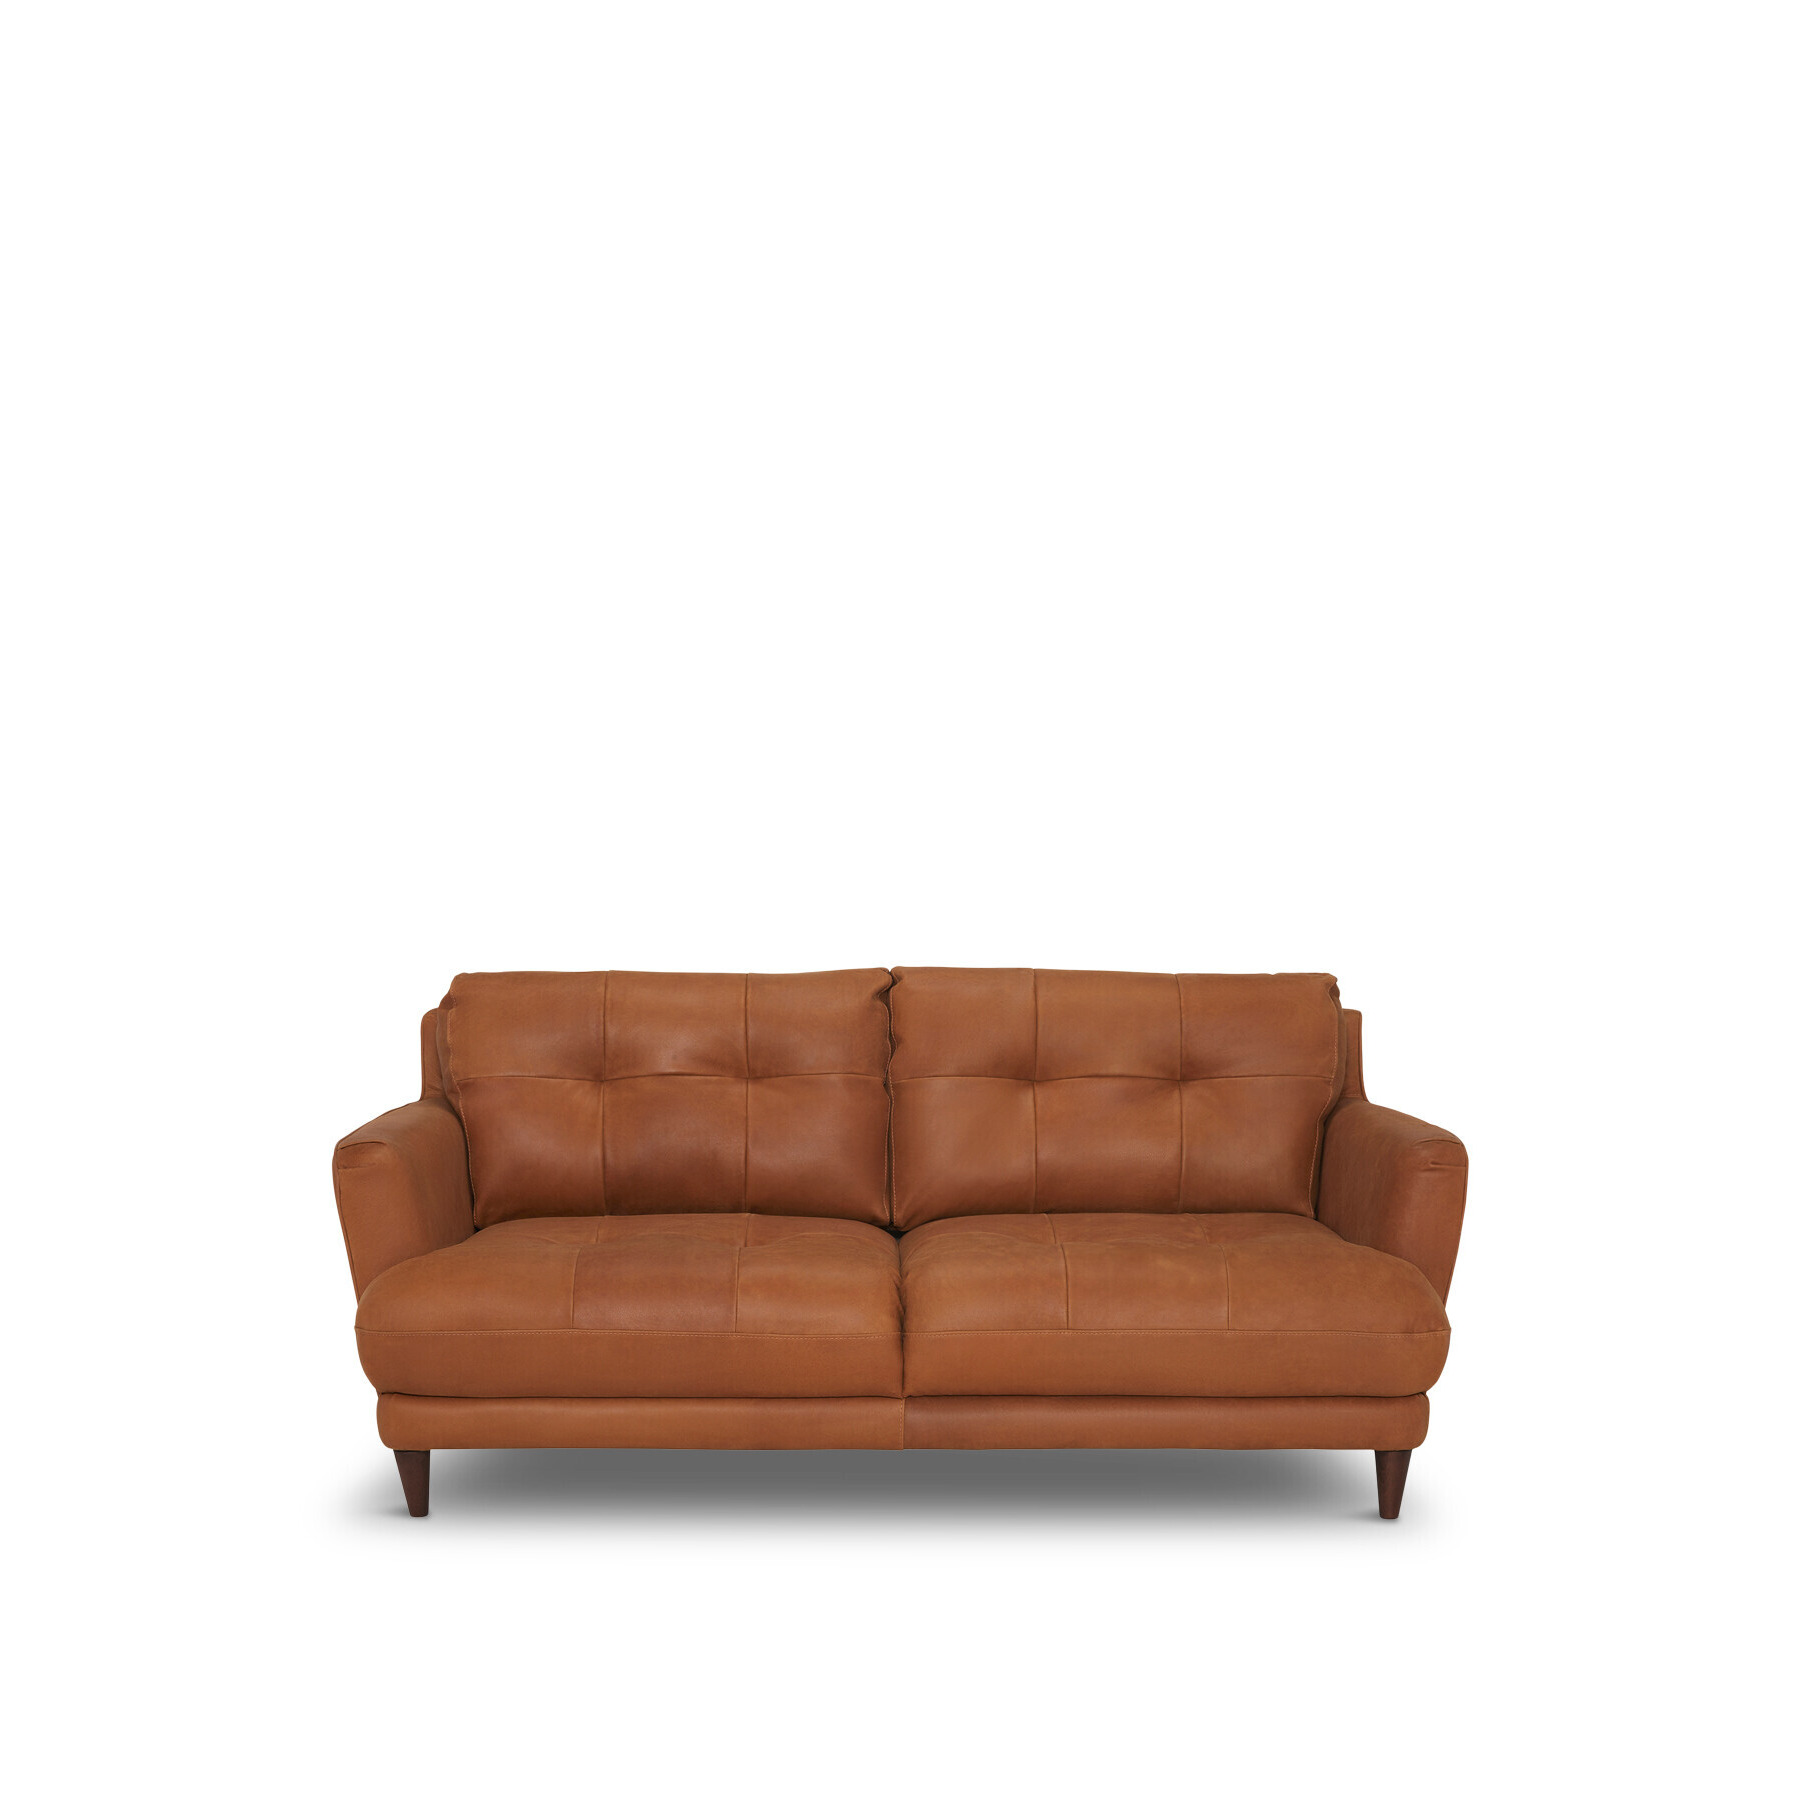 Barker and Stonehouse Aldo Loveseat - Size 2 Seater Brown - image 1